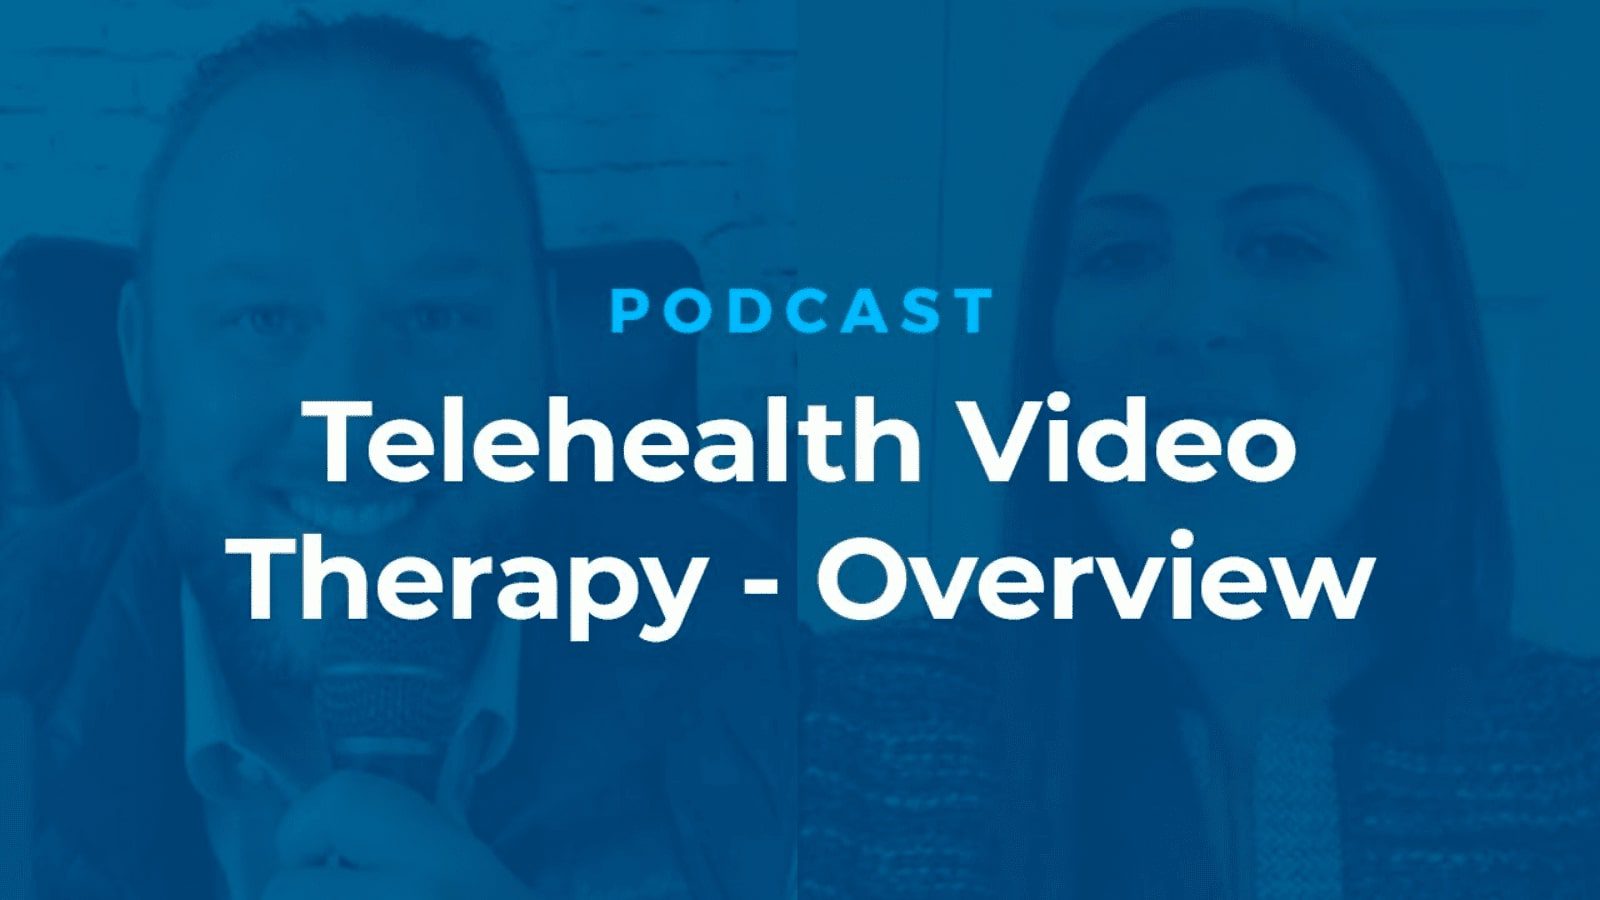 Telehealth video therapy - overview